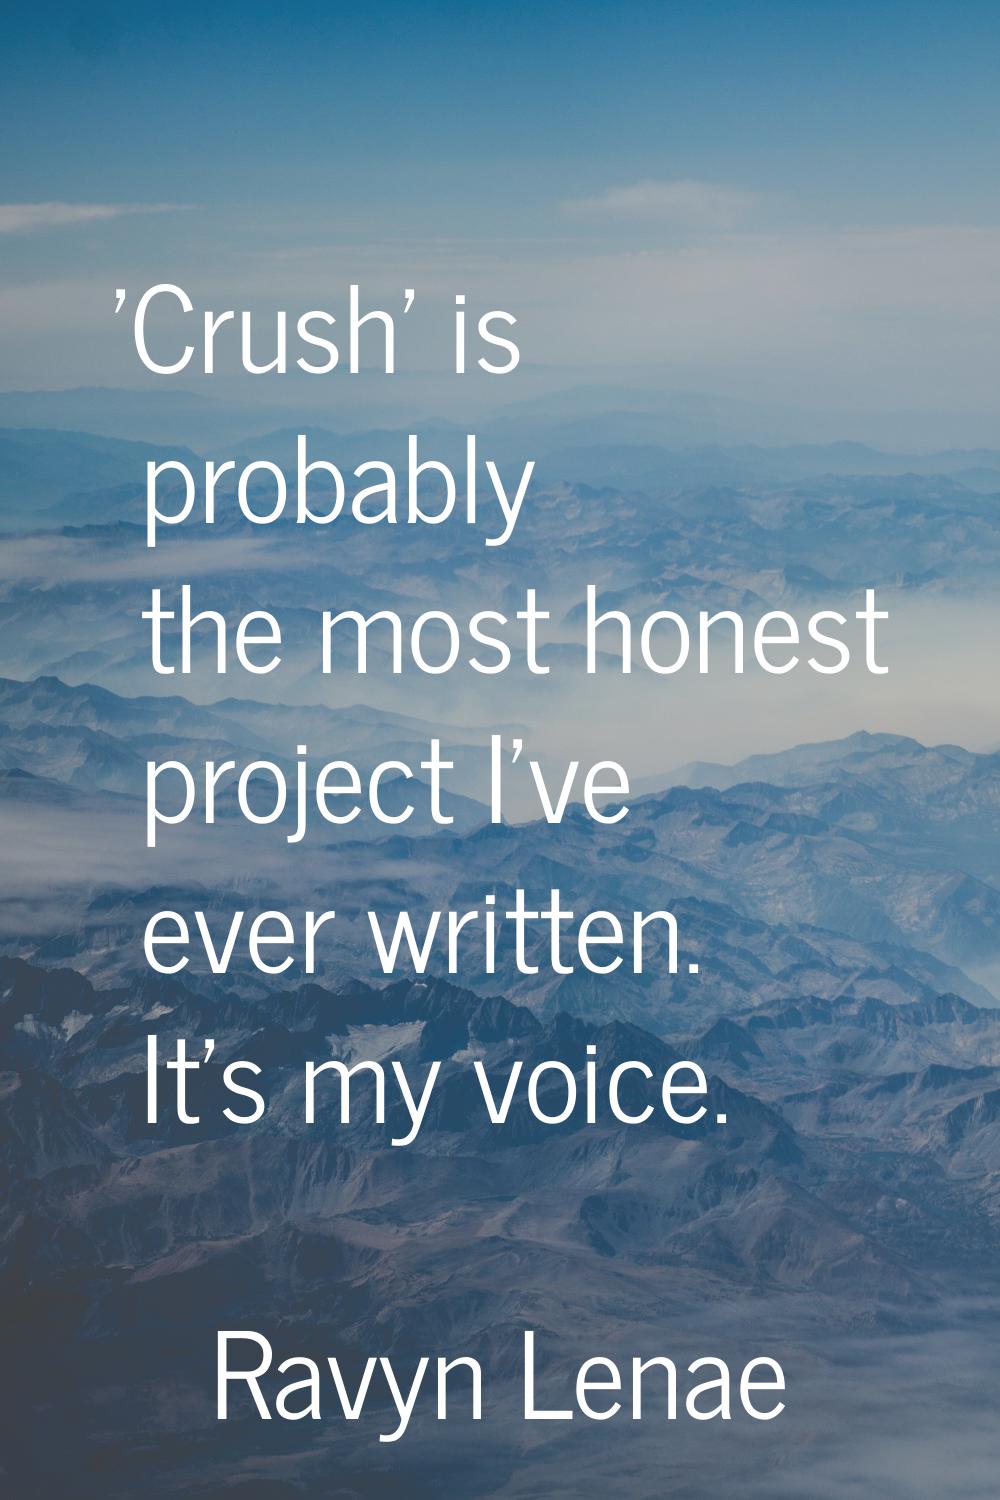 'Crush' is probably the most honest project I've ever written. It's my voice.